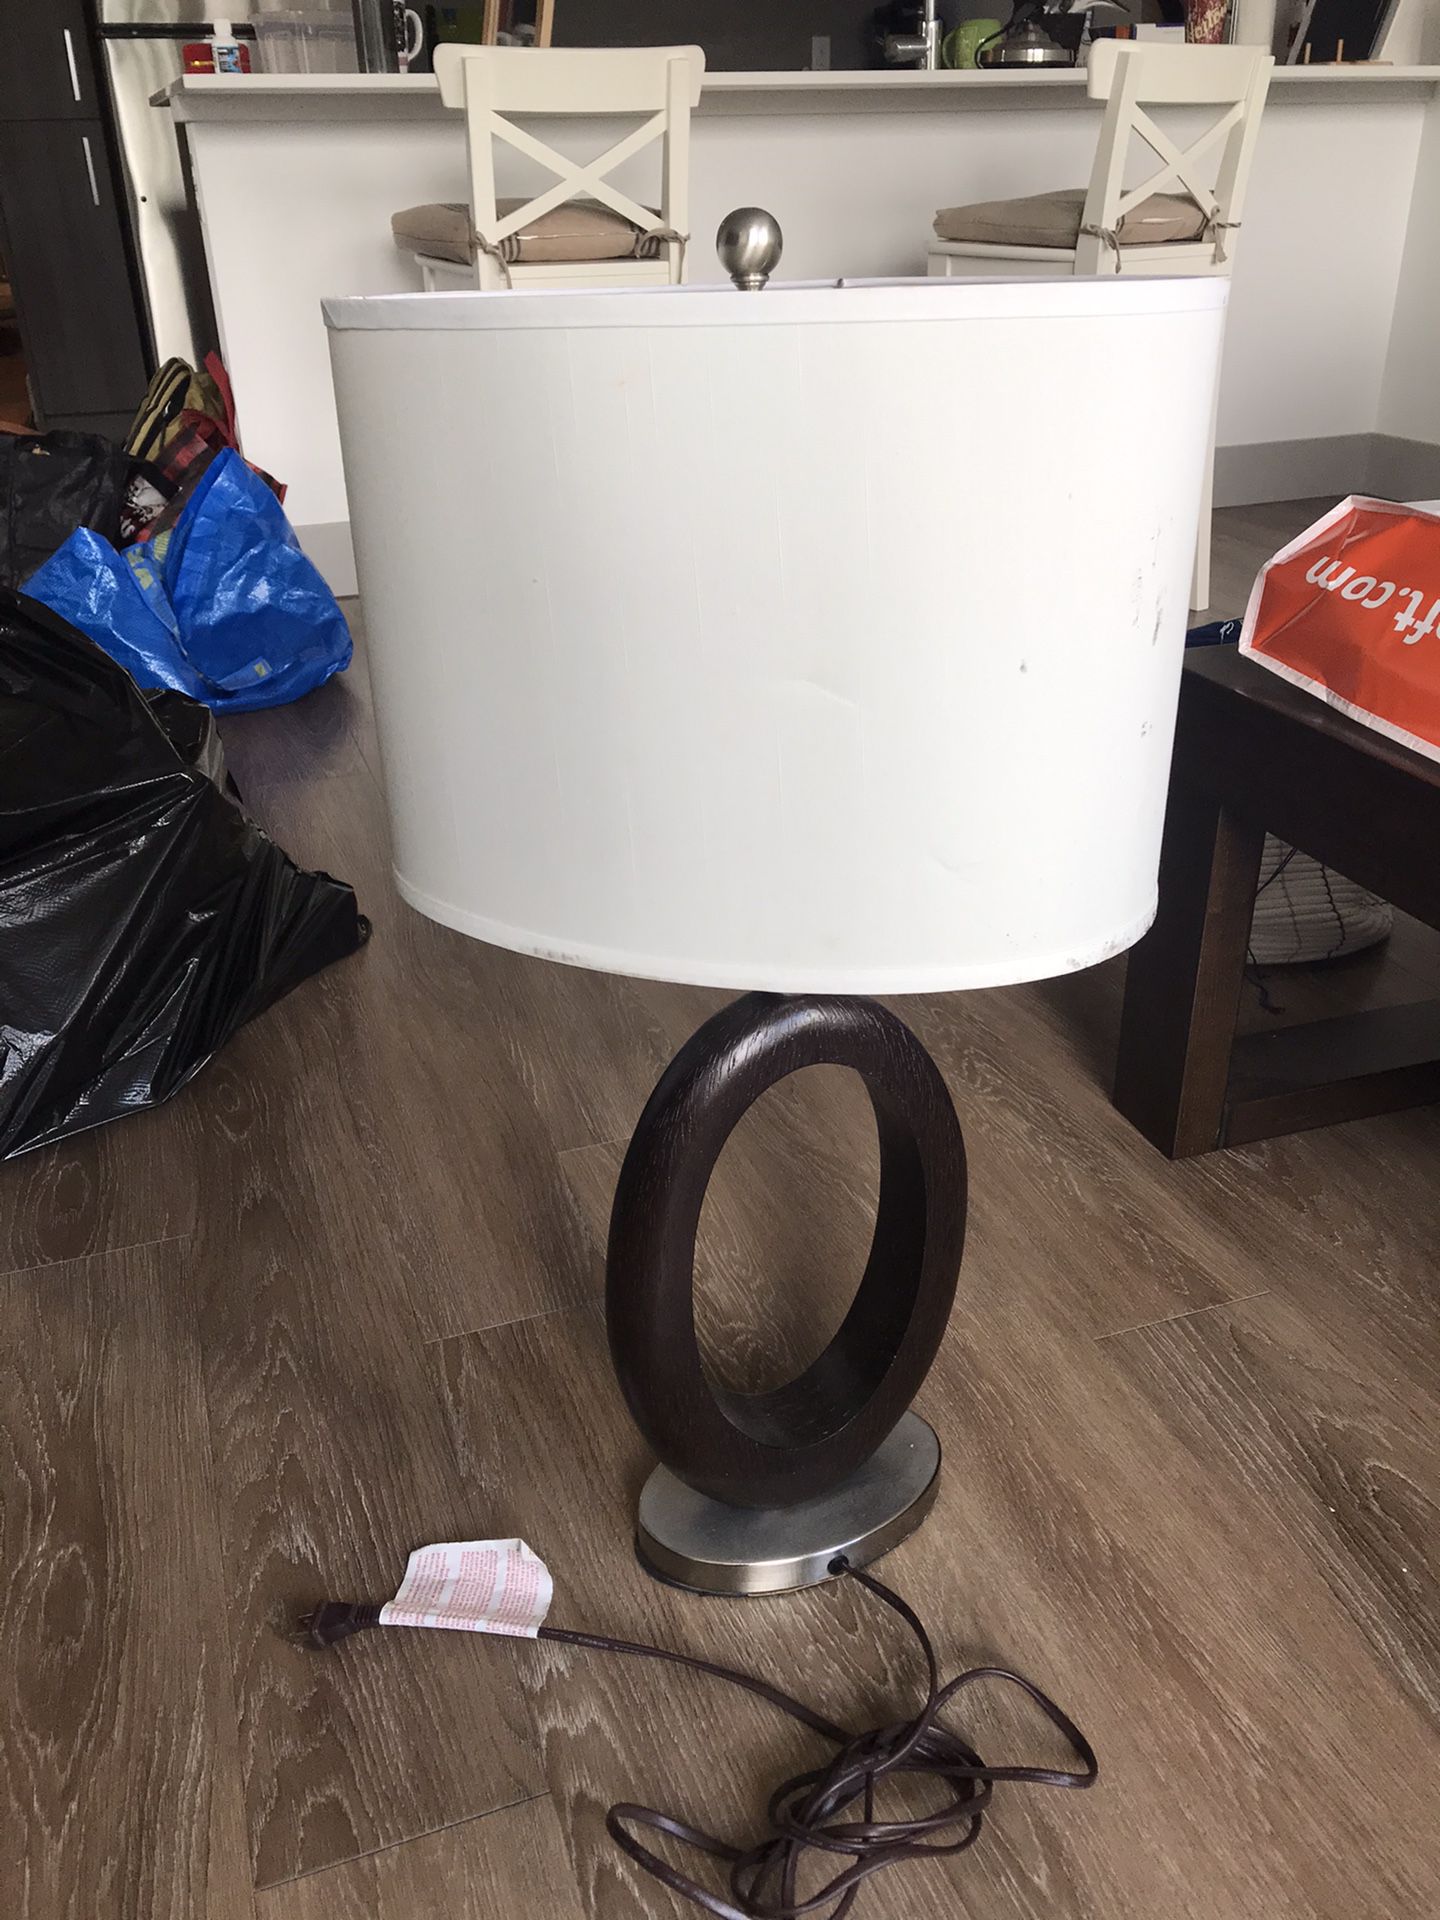 Table lamp from Ashley Furniture